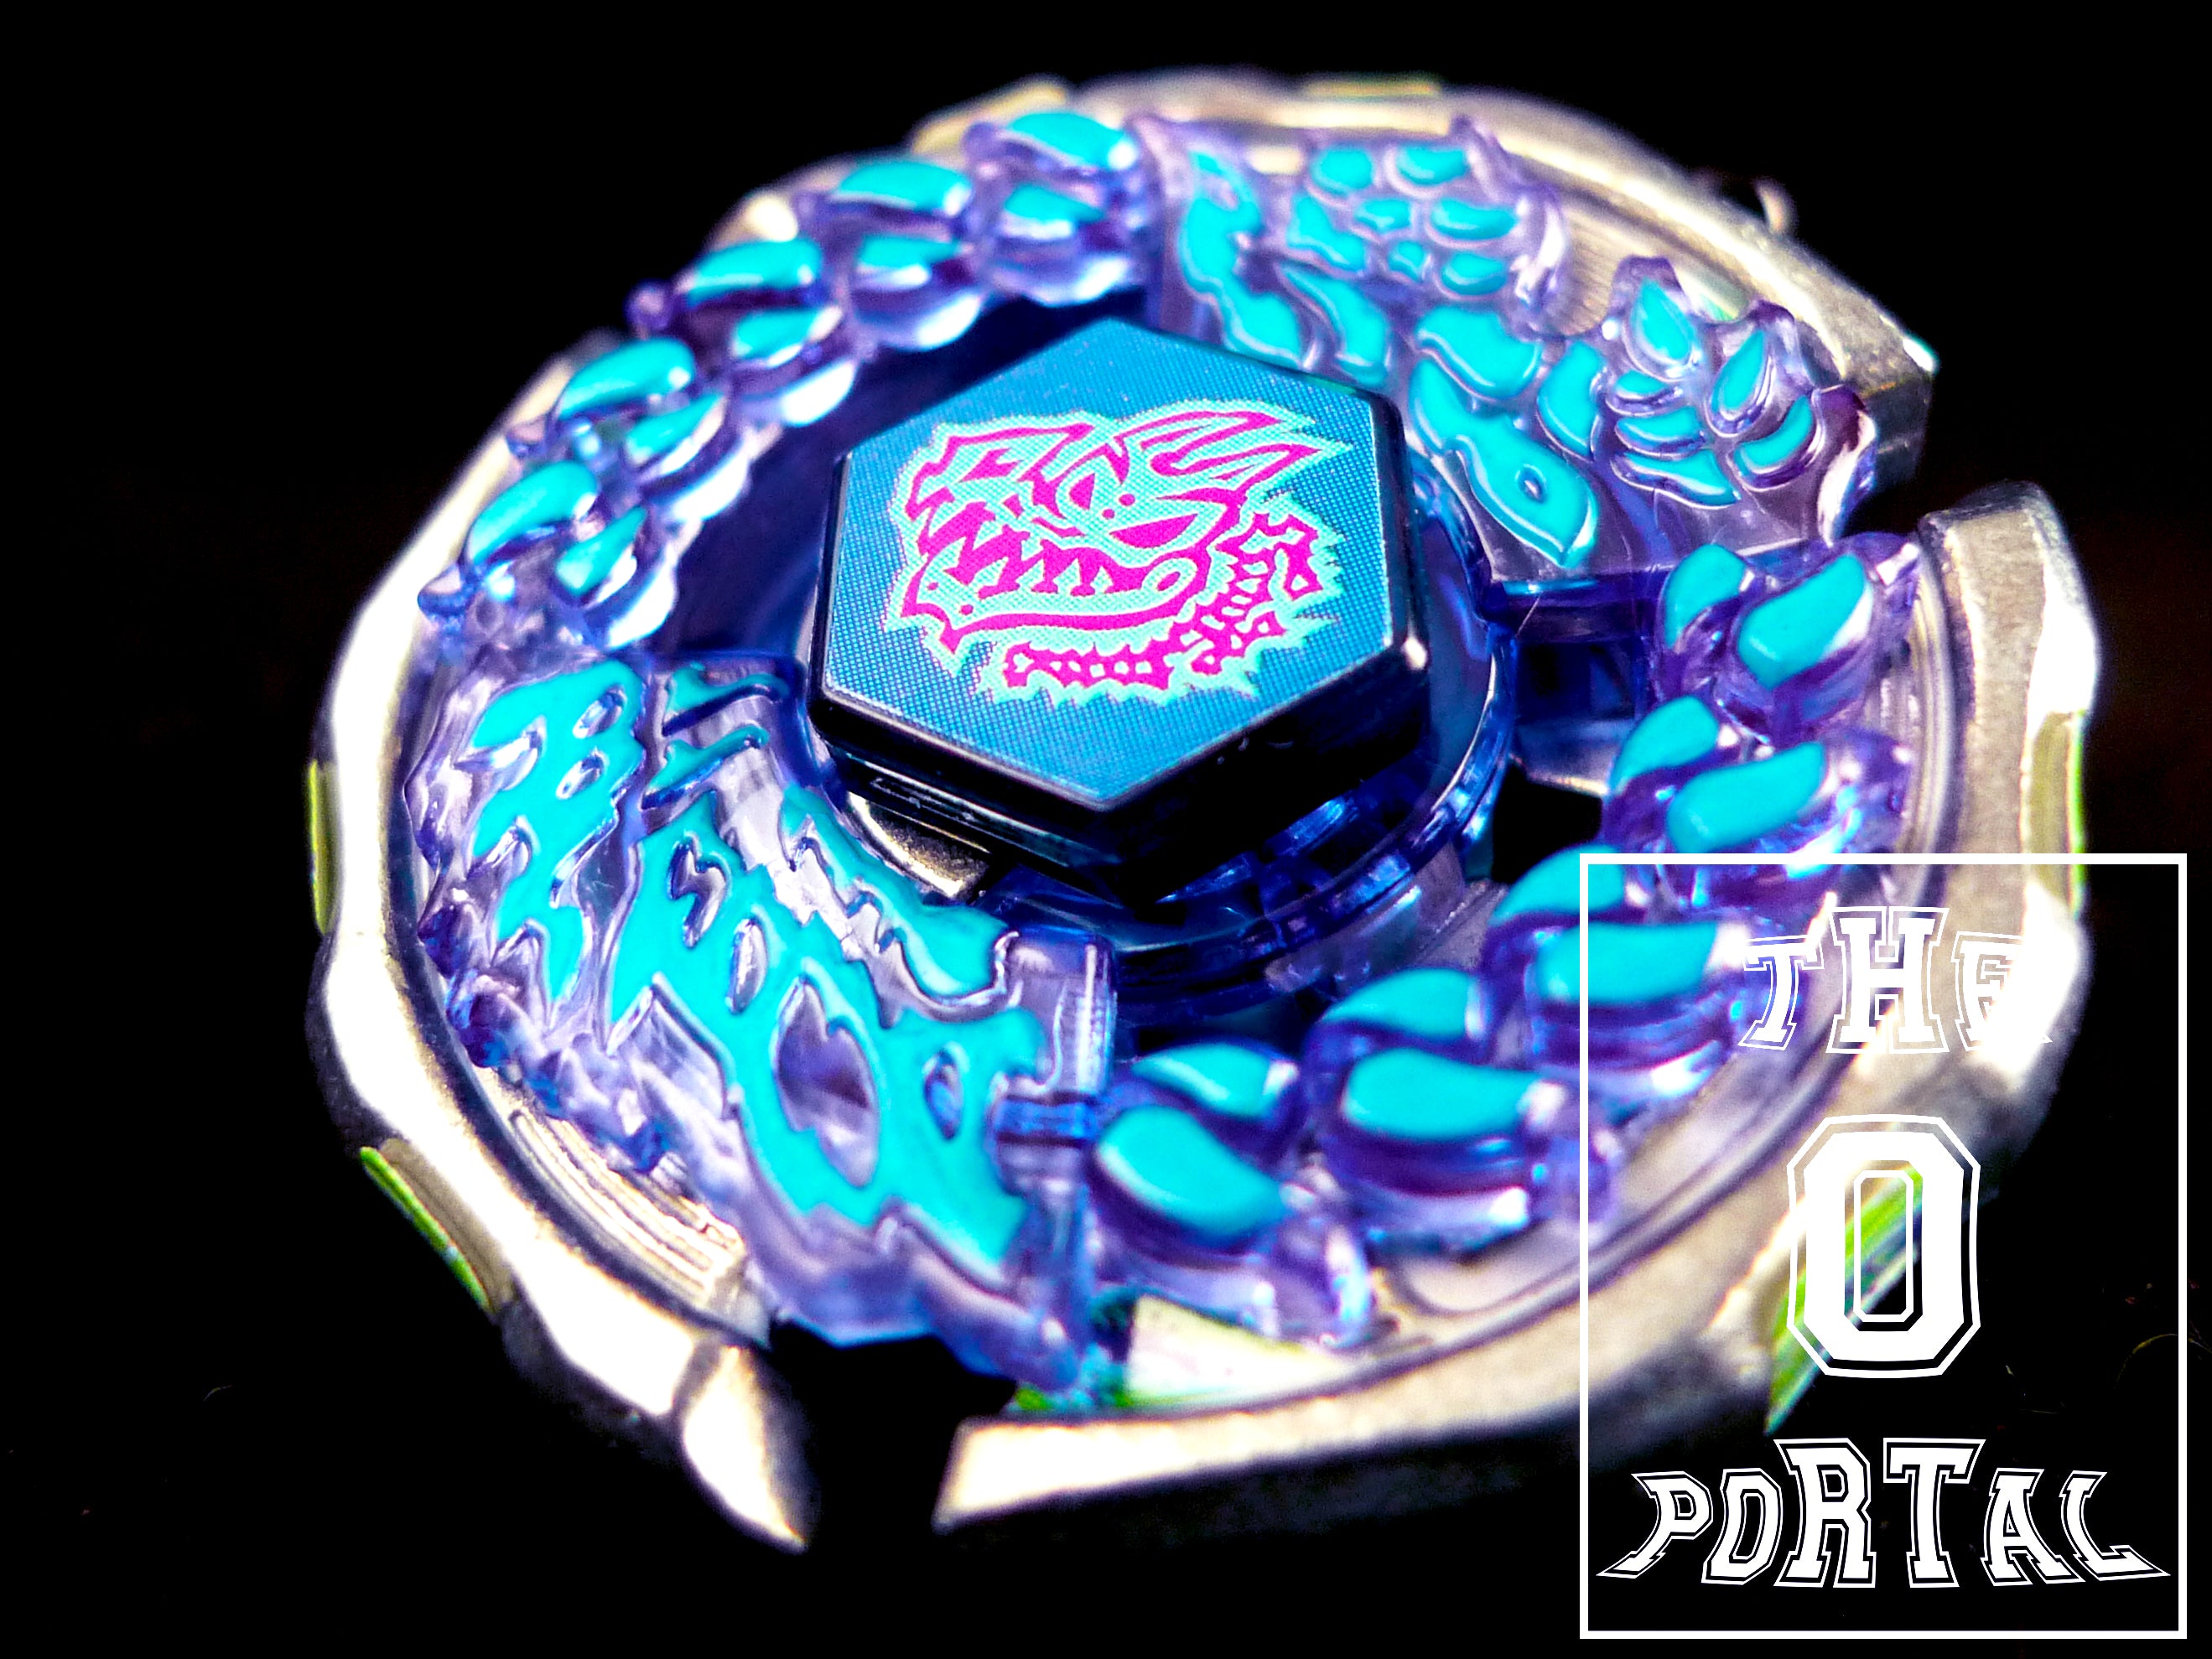 Beyblades #bb91 Japanese 2010 Metal Fusion Battle Top Booster Ray Gil